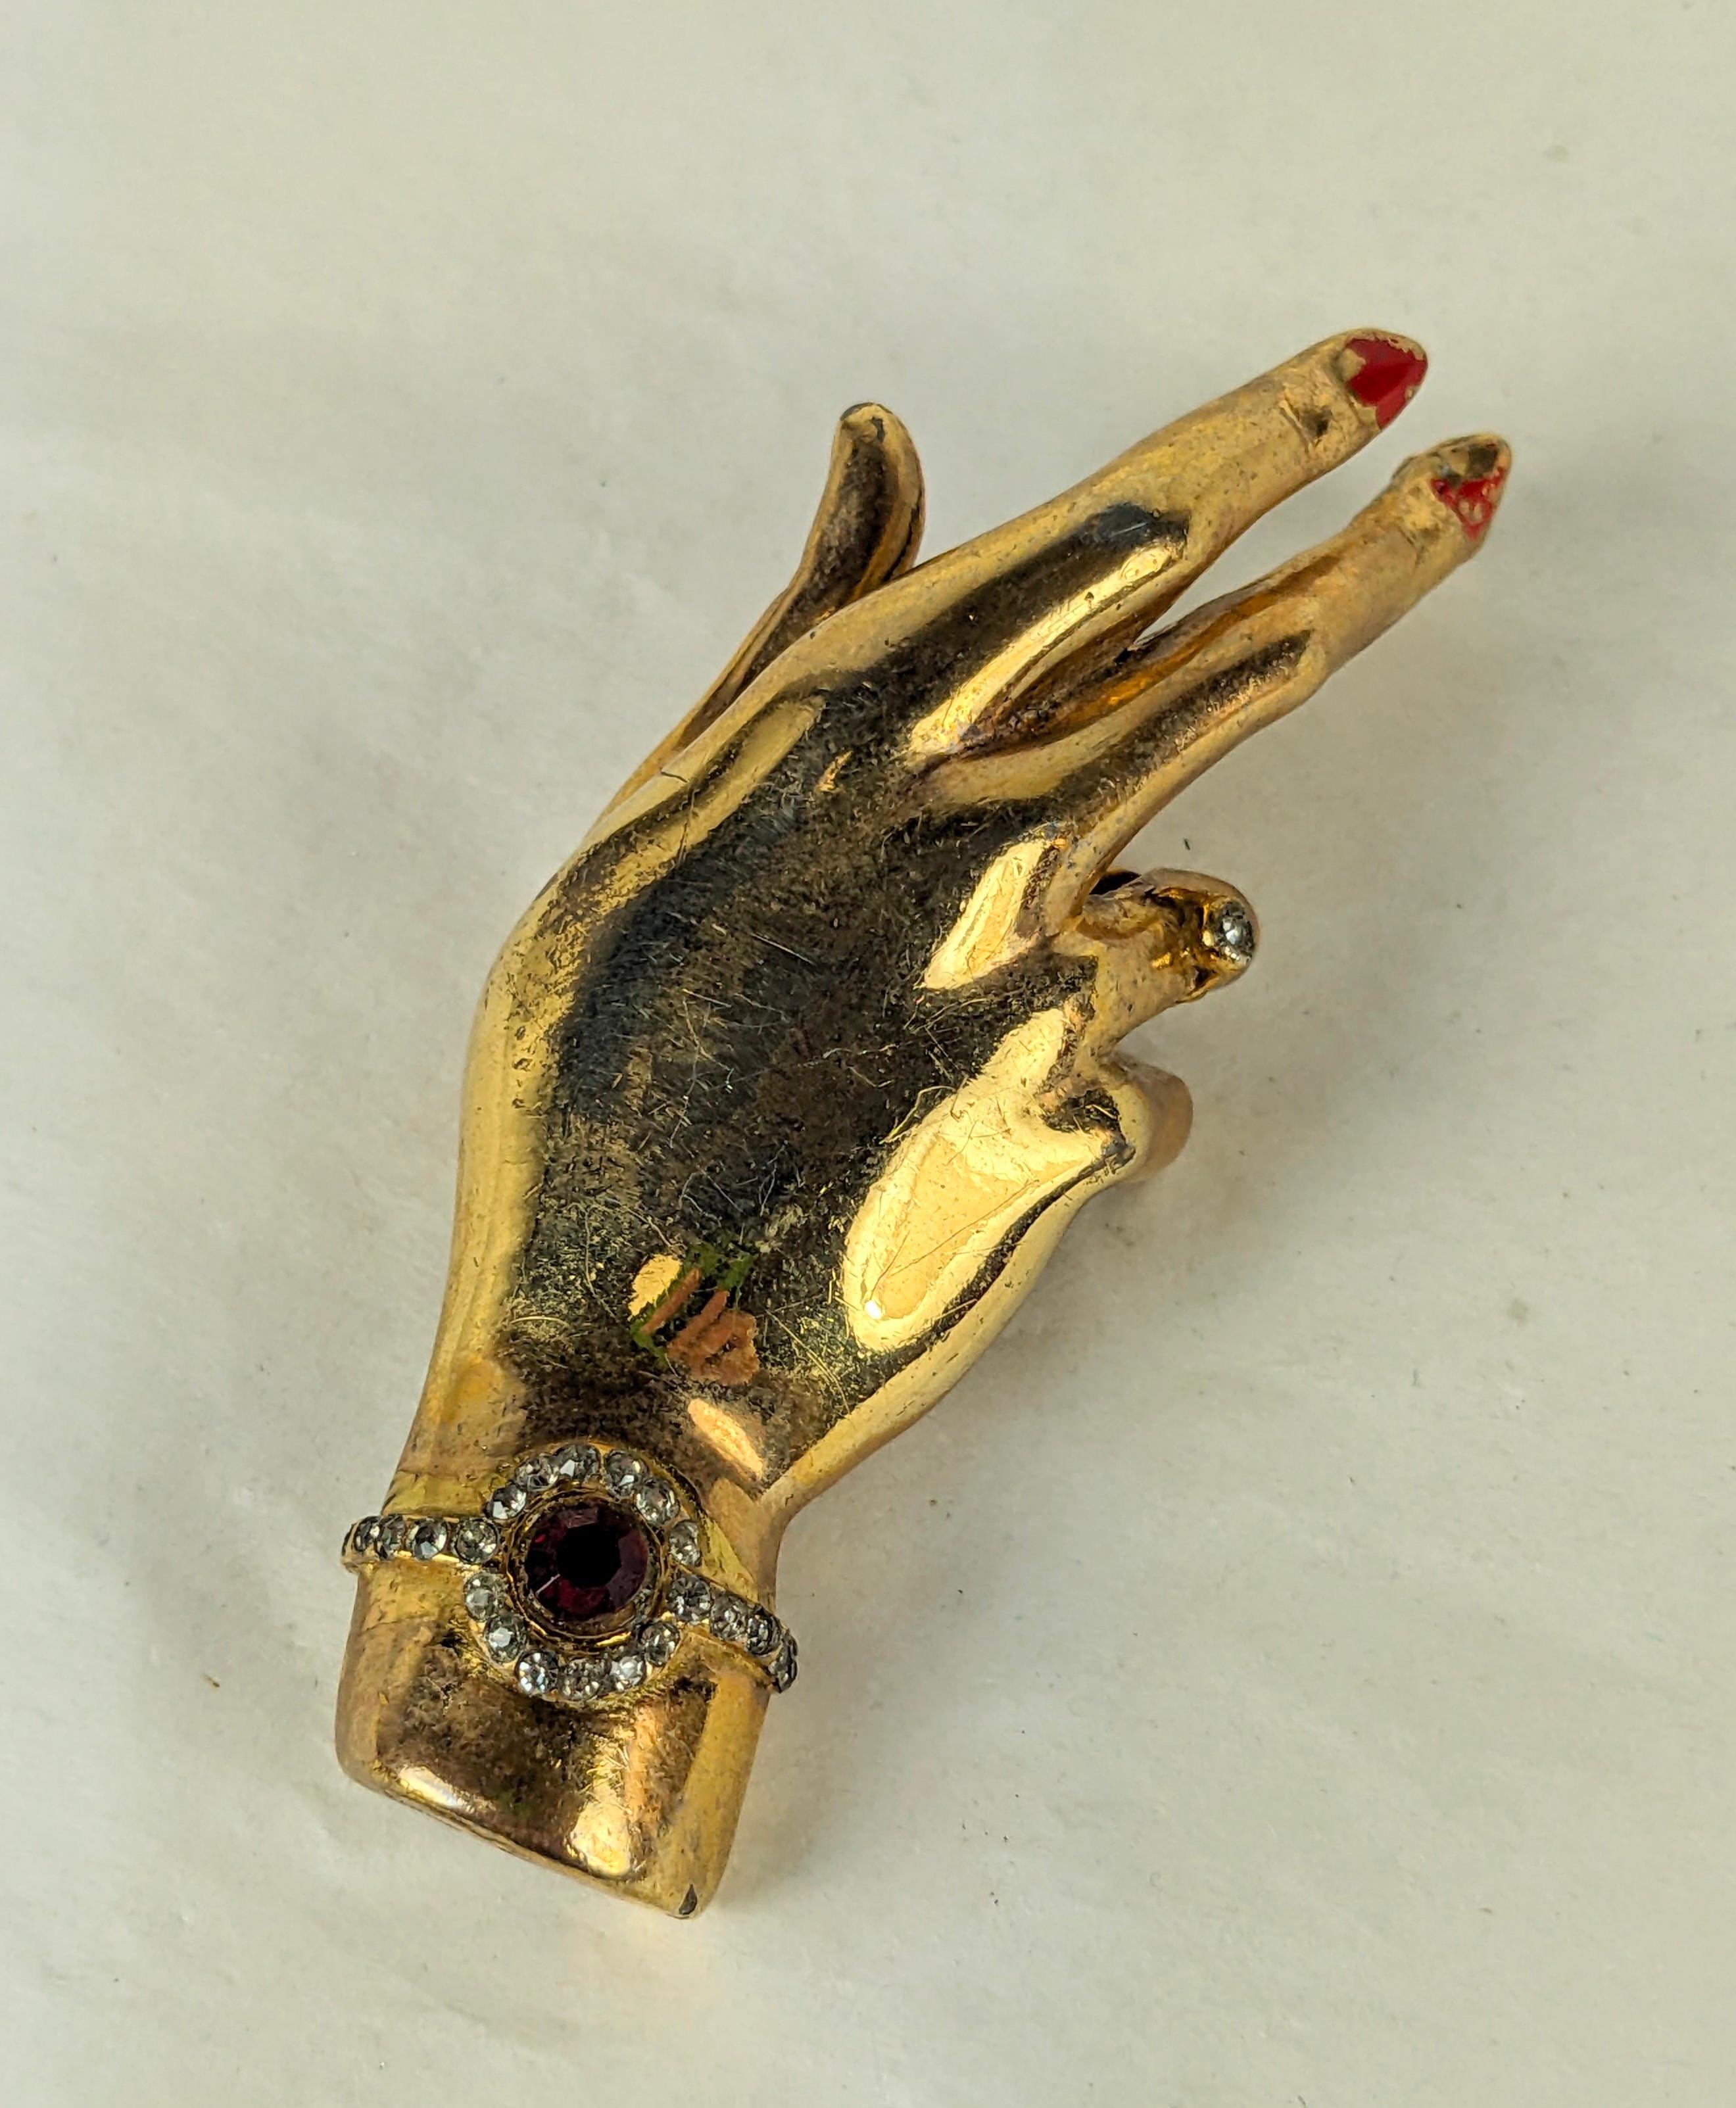 Amazing Rare Silson Art Deco Gilt Corsage Hand Brooch from the 1940's with a jeweled bracelet, enameled fingernails and engagement ring. Designed with a fitting inside to hold a spray of flowers on lapel.
 3